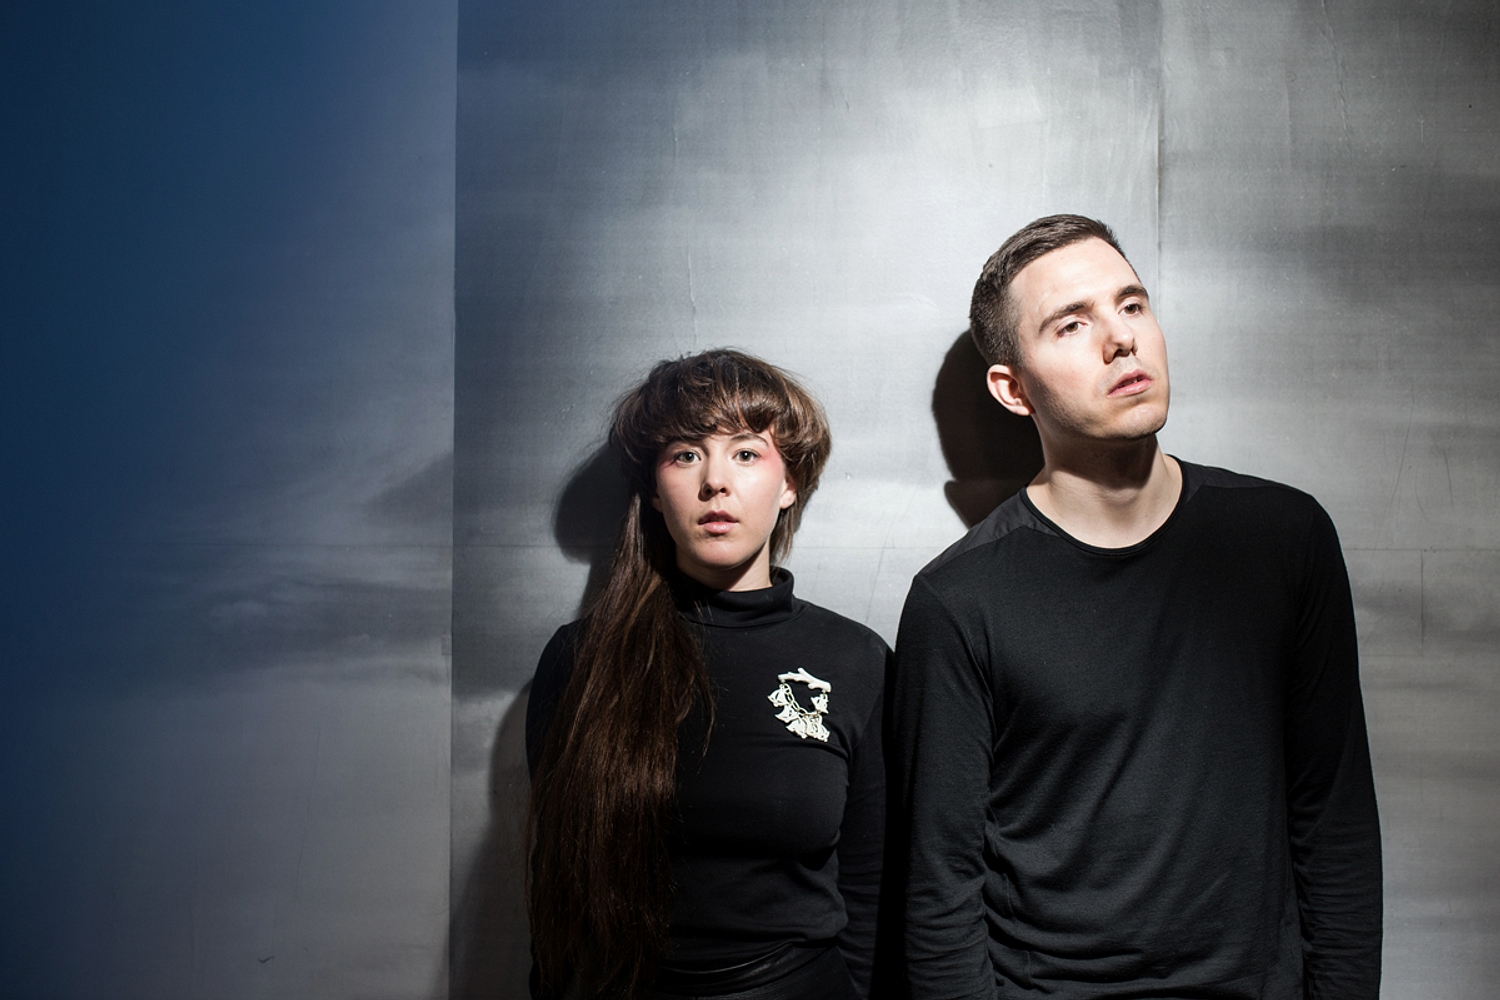 Watch Purity Ring perform ‘Begin Again’ on Seth Meyers